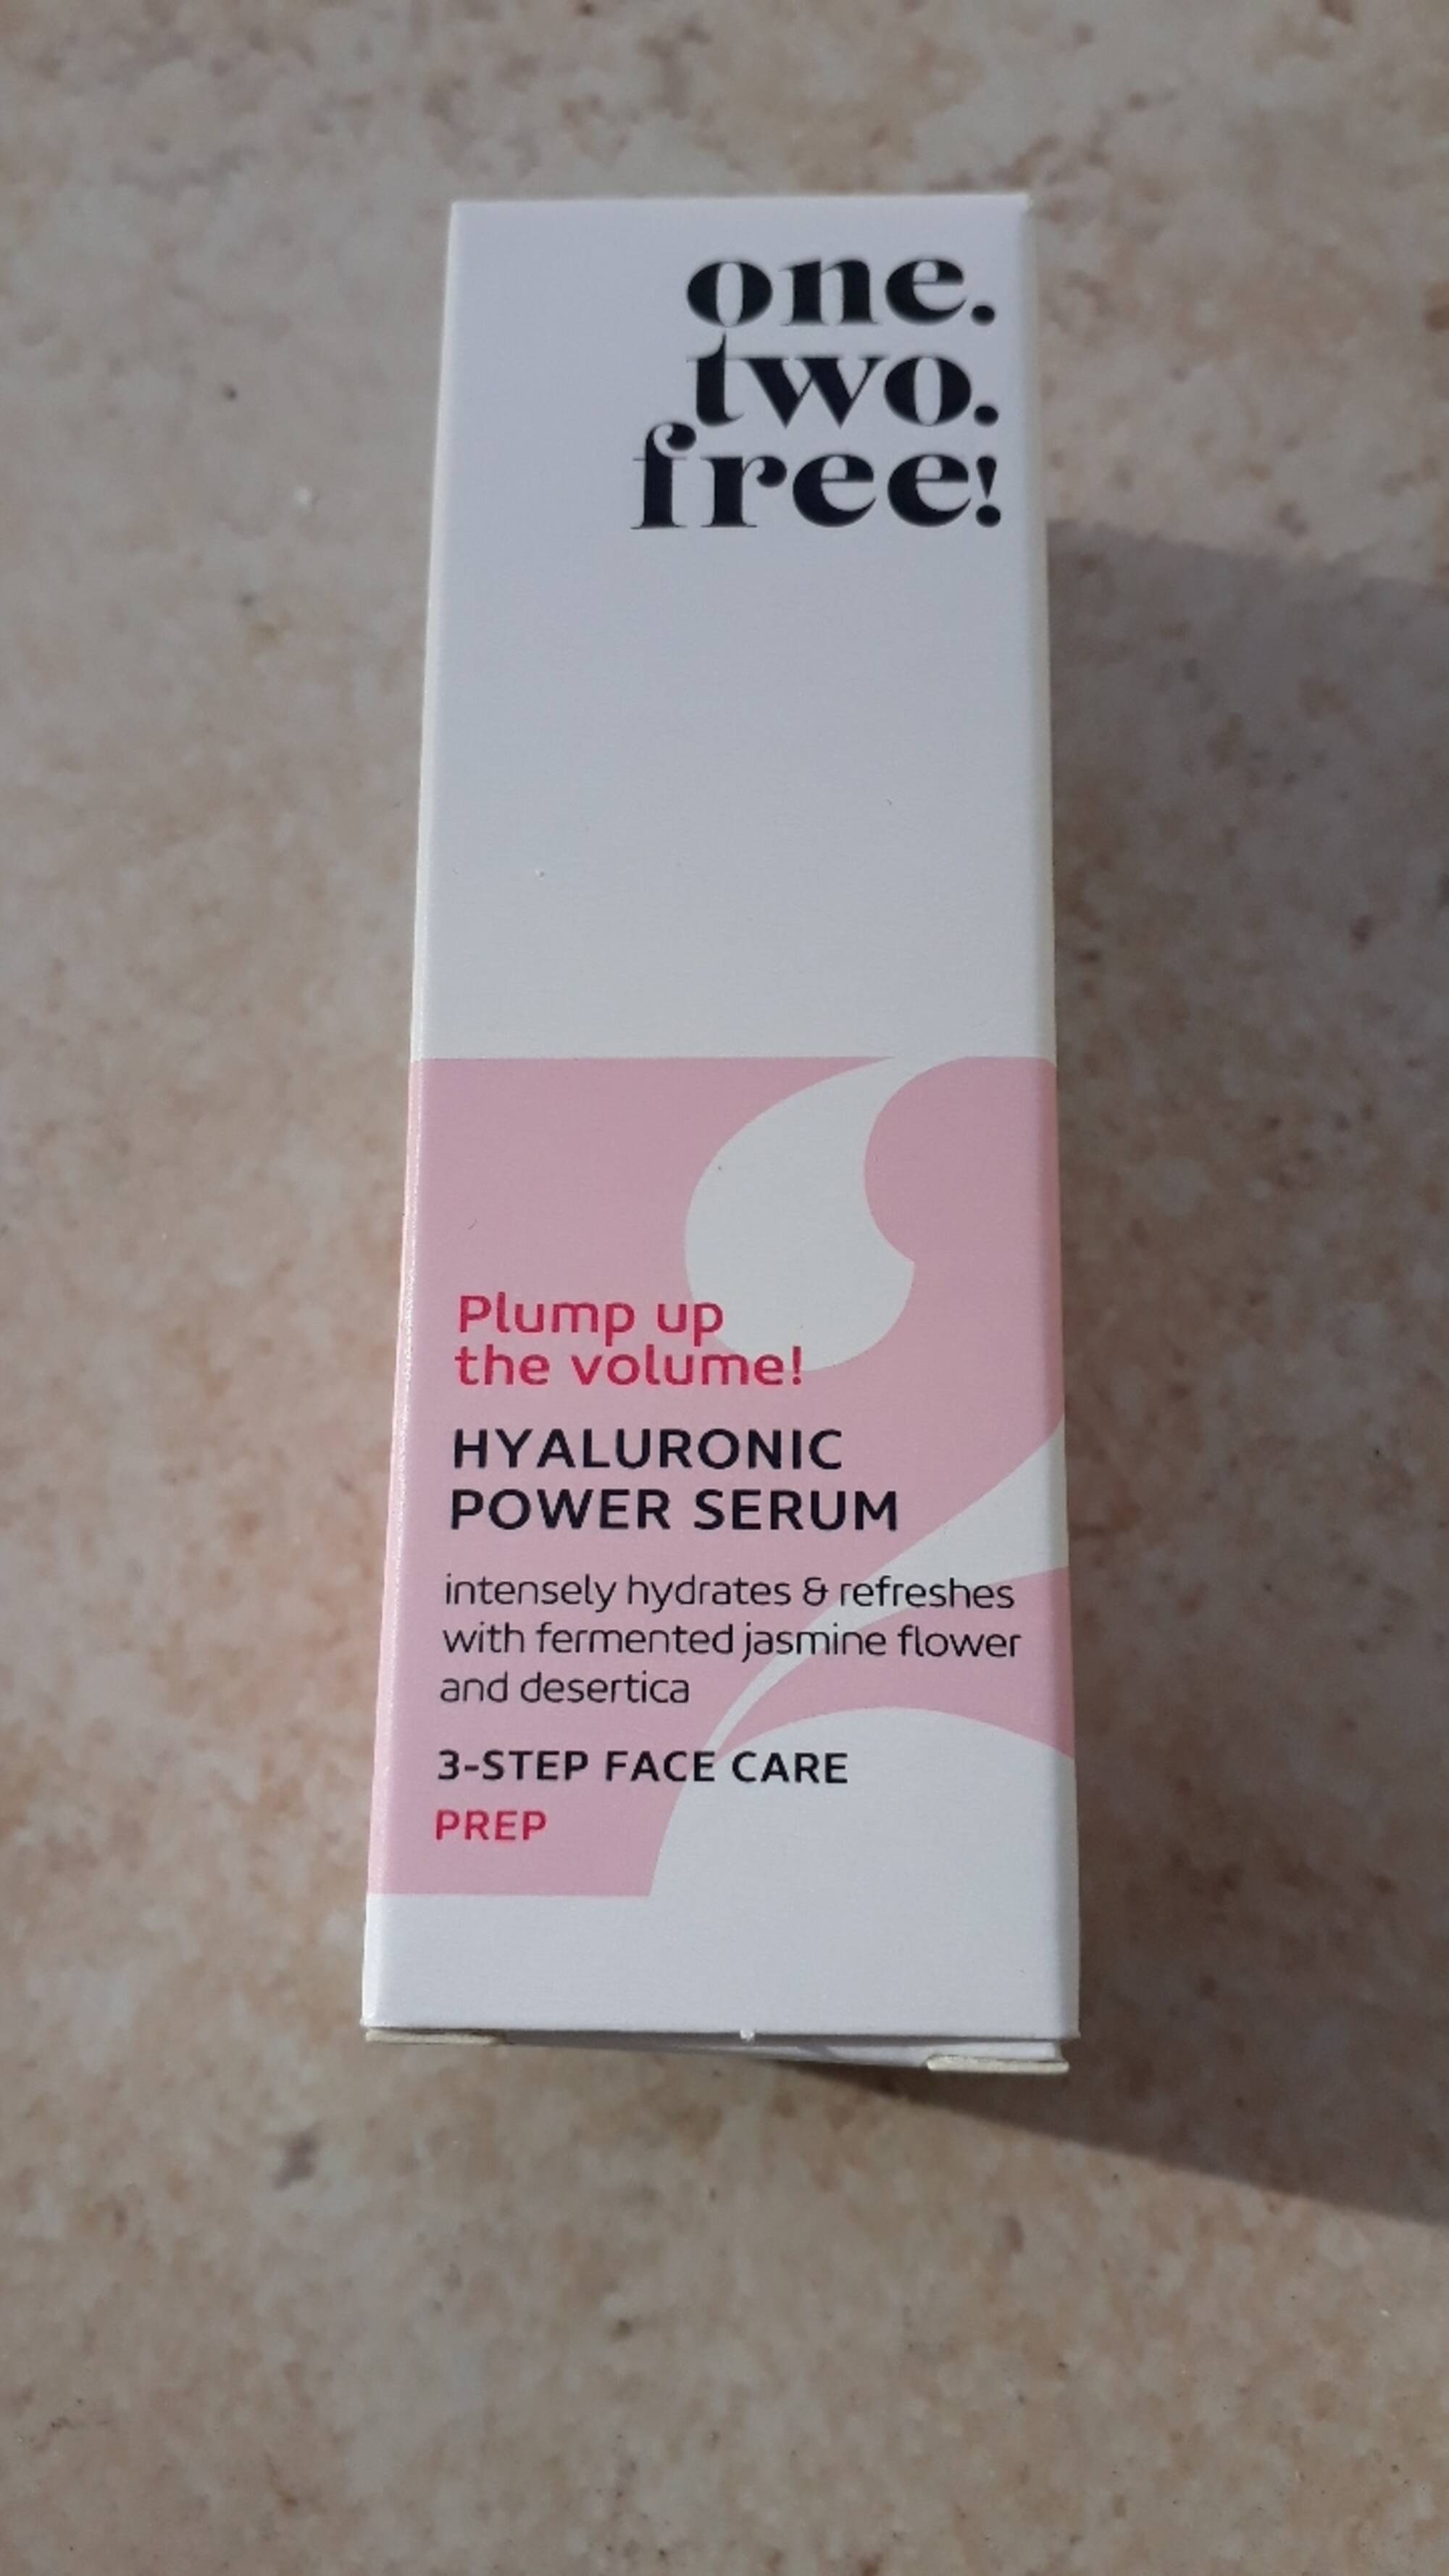 ONE.TWO.FREE! - Hyaluronic power serum